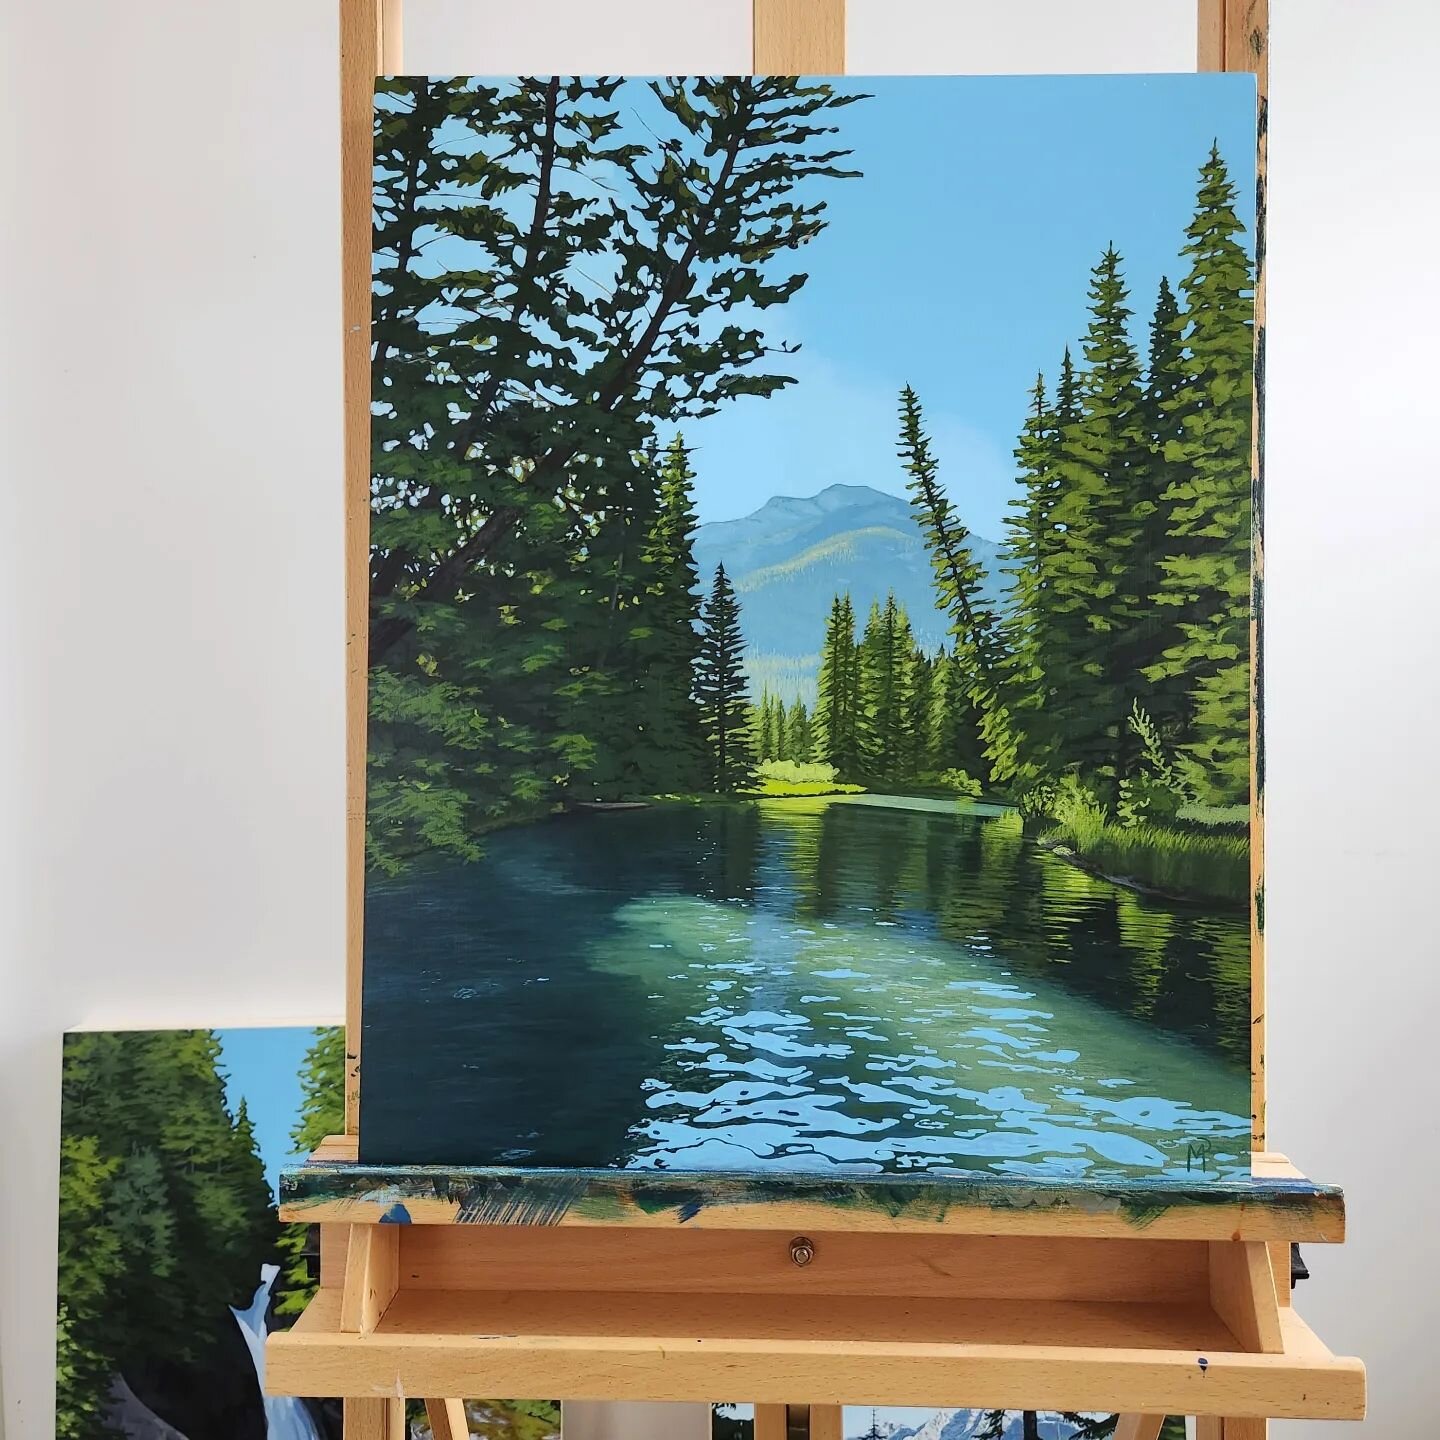 &quot;Forty Mile Creek&quot; 20 x 16&quot; Acrylic on cradled wood panel 

This set of three 20x16&quot; pieces is now complete! I usually prefer to paint from my own reference photos, but when I came across each of these pictures I knew I had to pai